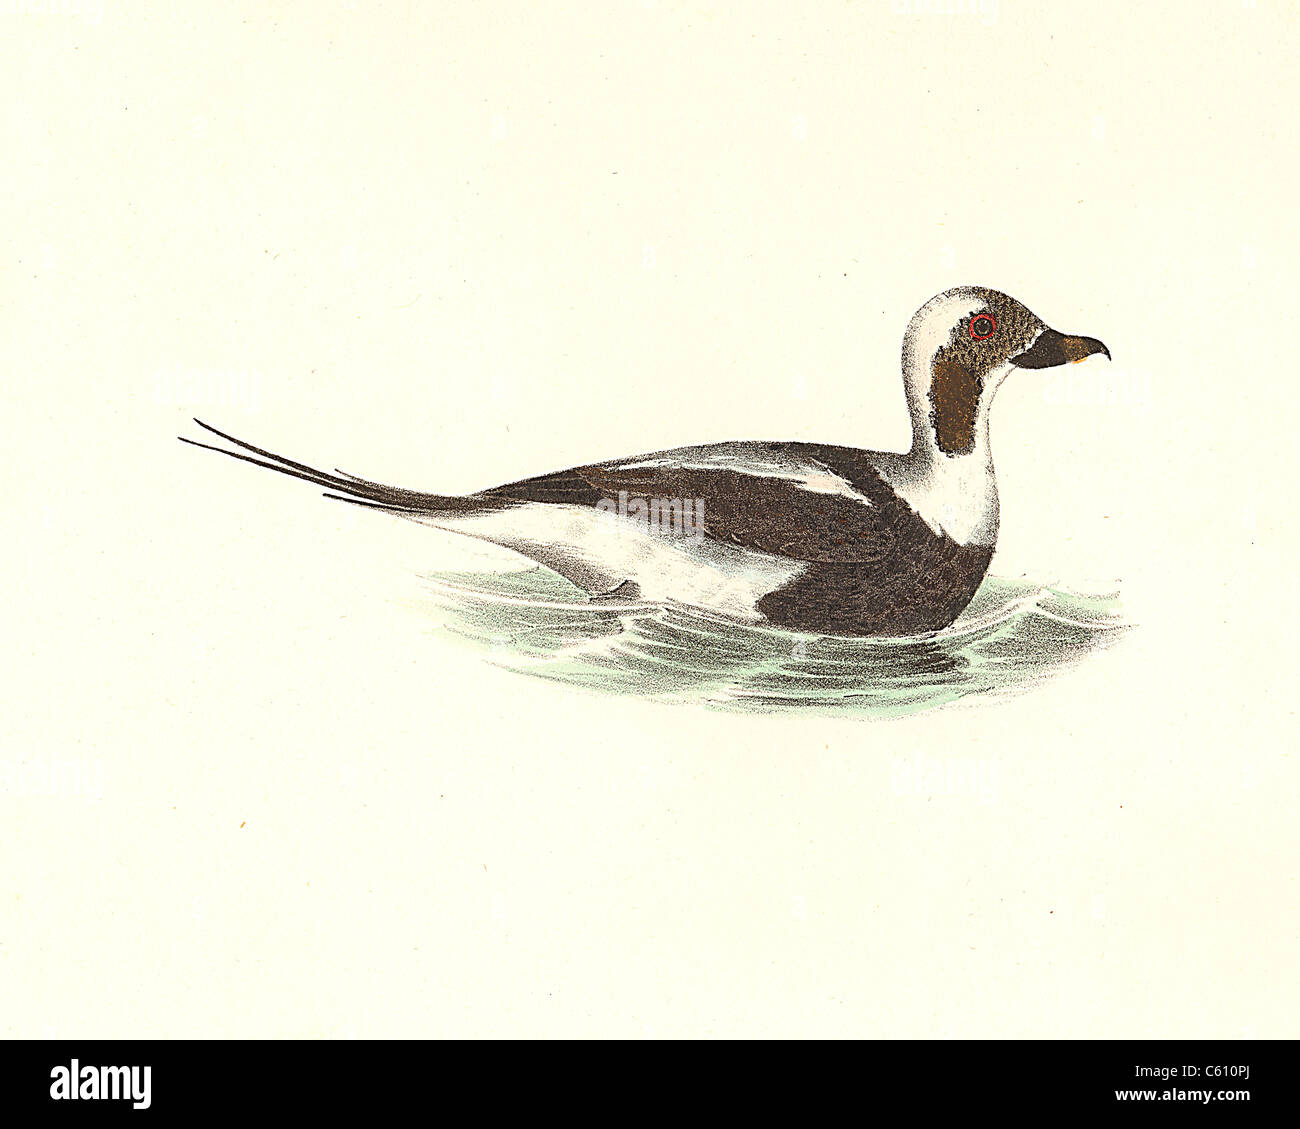 The Oldwife, Old Squaw Long-Tailed Duck (Fuligula glacialis, Clangula hyemalis) vintage bird lithograph - James De Kay, Zoology of New York, Stock Photo